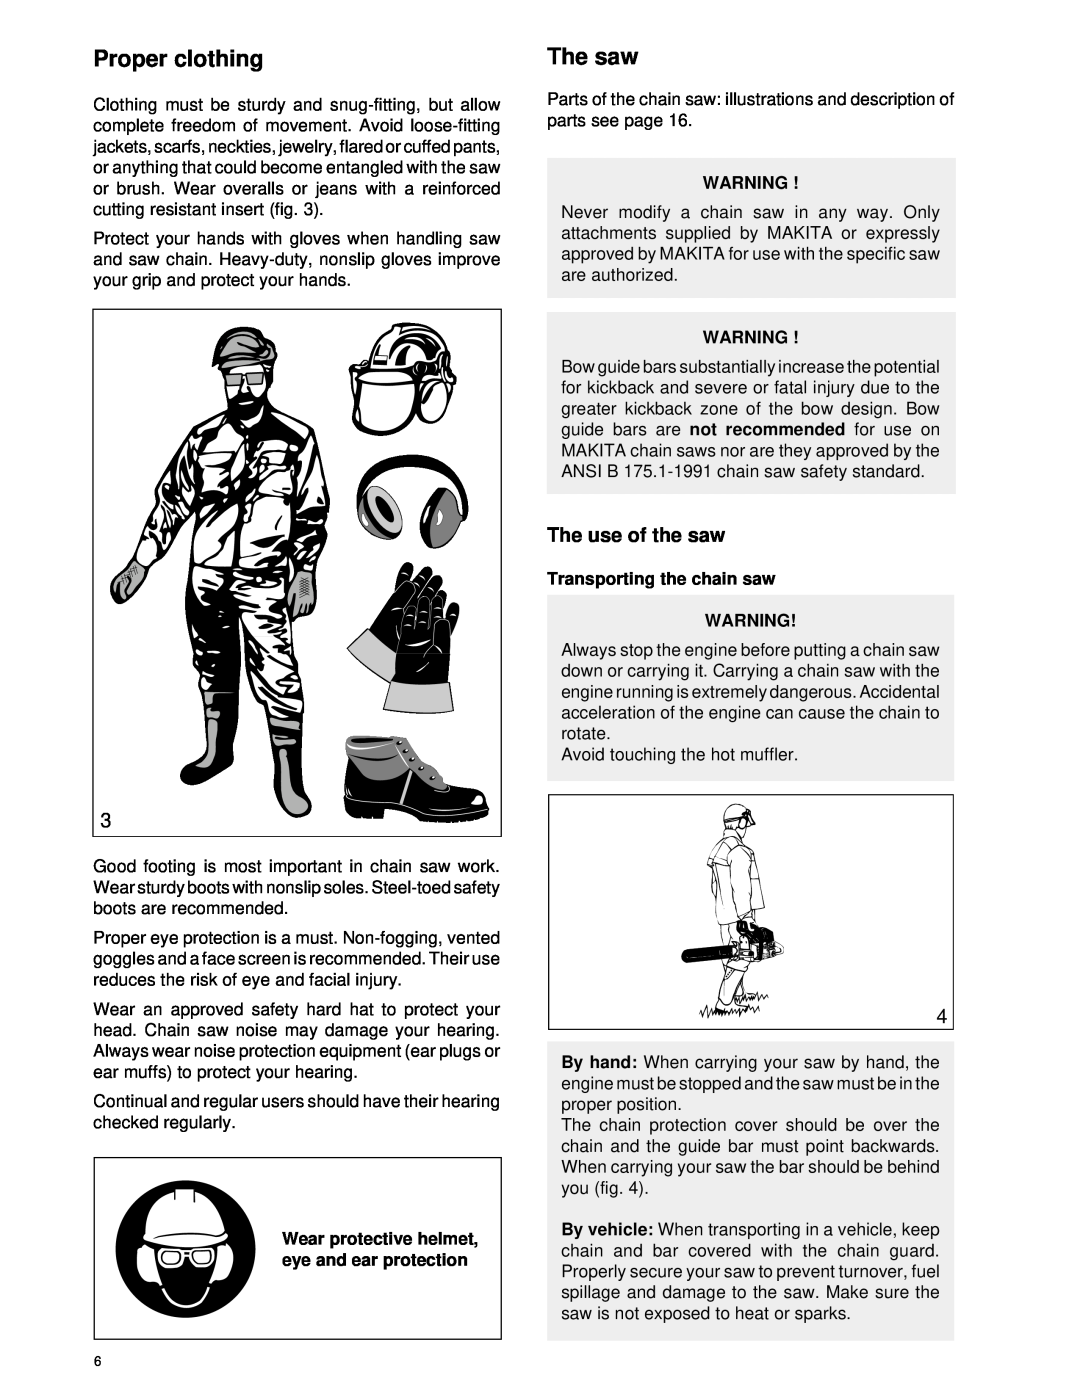 Dolmar Chain Saw manual Proper clothing, The saw, The use of the saw, Wear protective helmet, eye and ear protection 